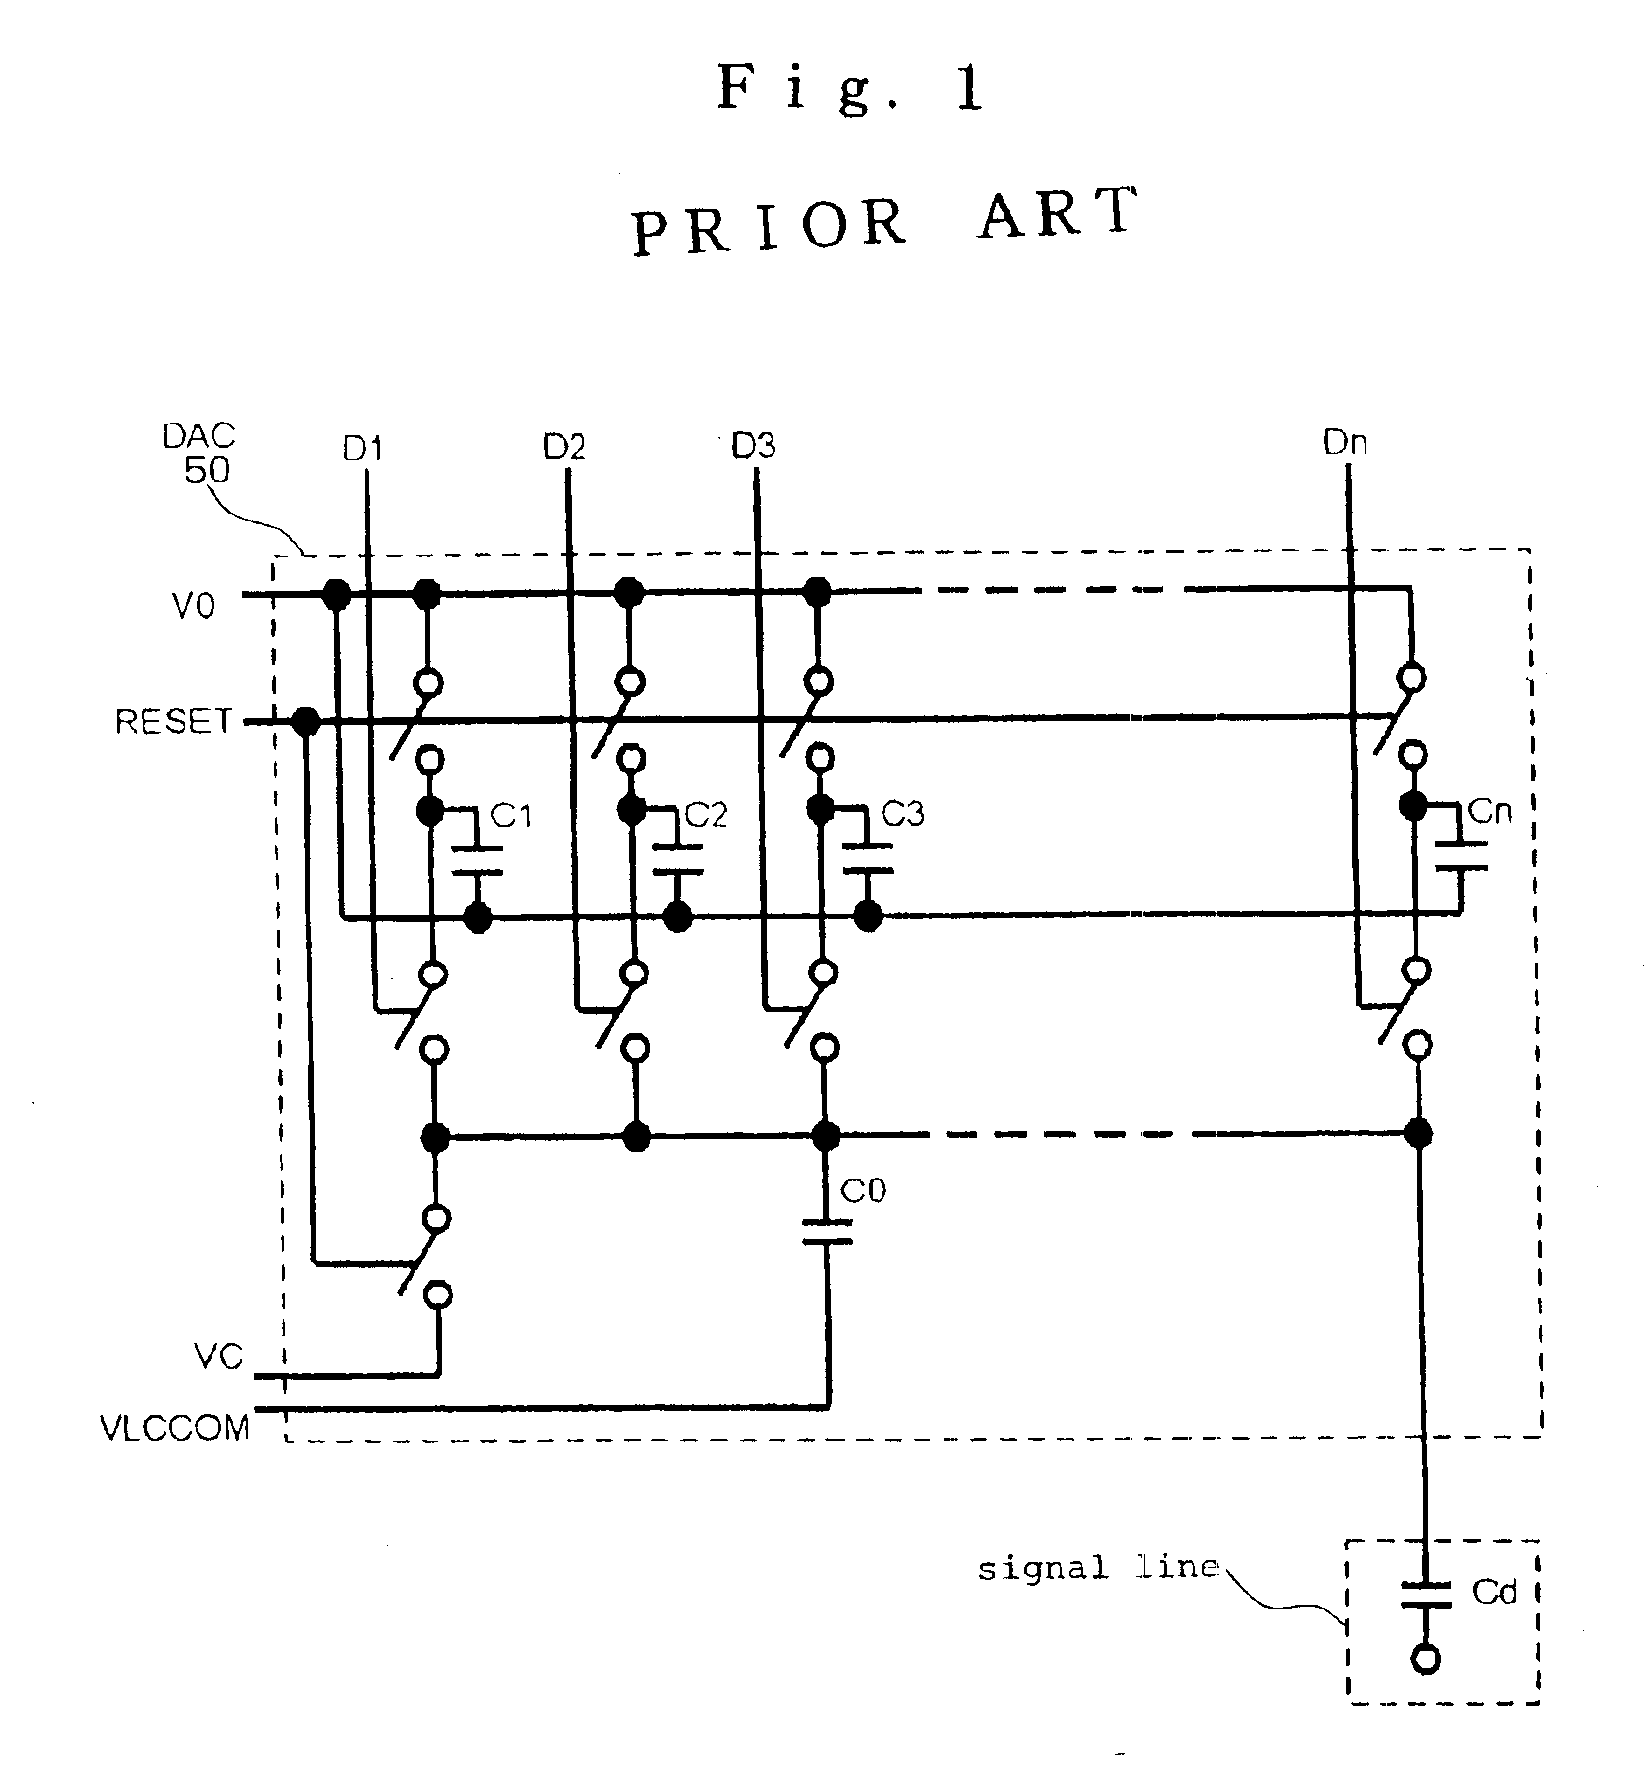 Display device for D/A conversion using load capacitances of two lines